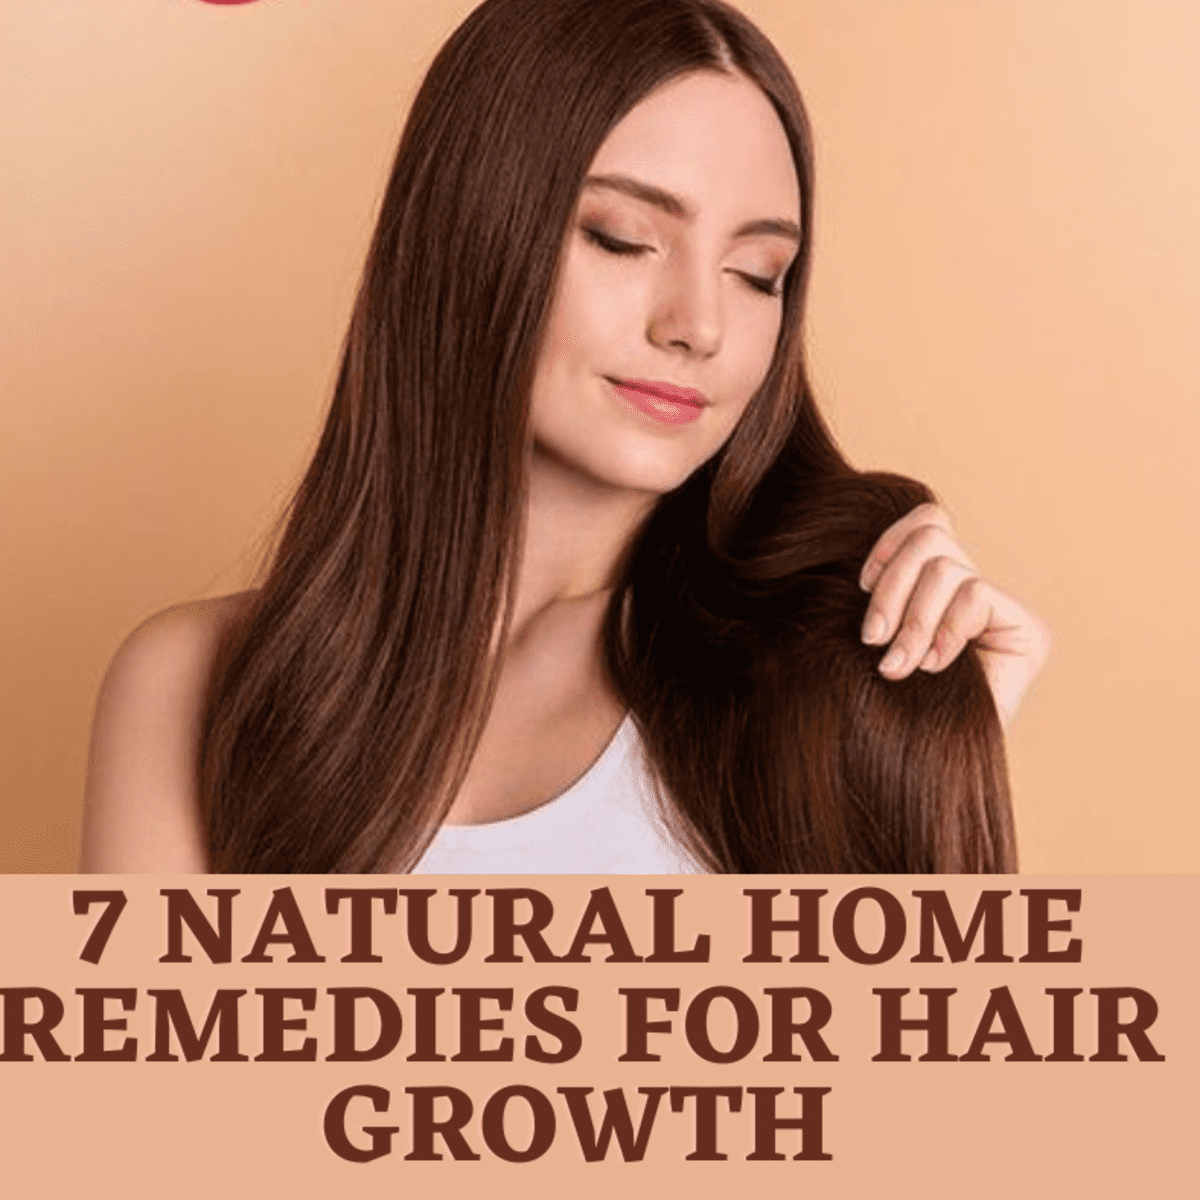 7 Home Remedies For Hair Growth - HubPages